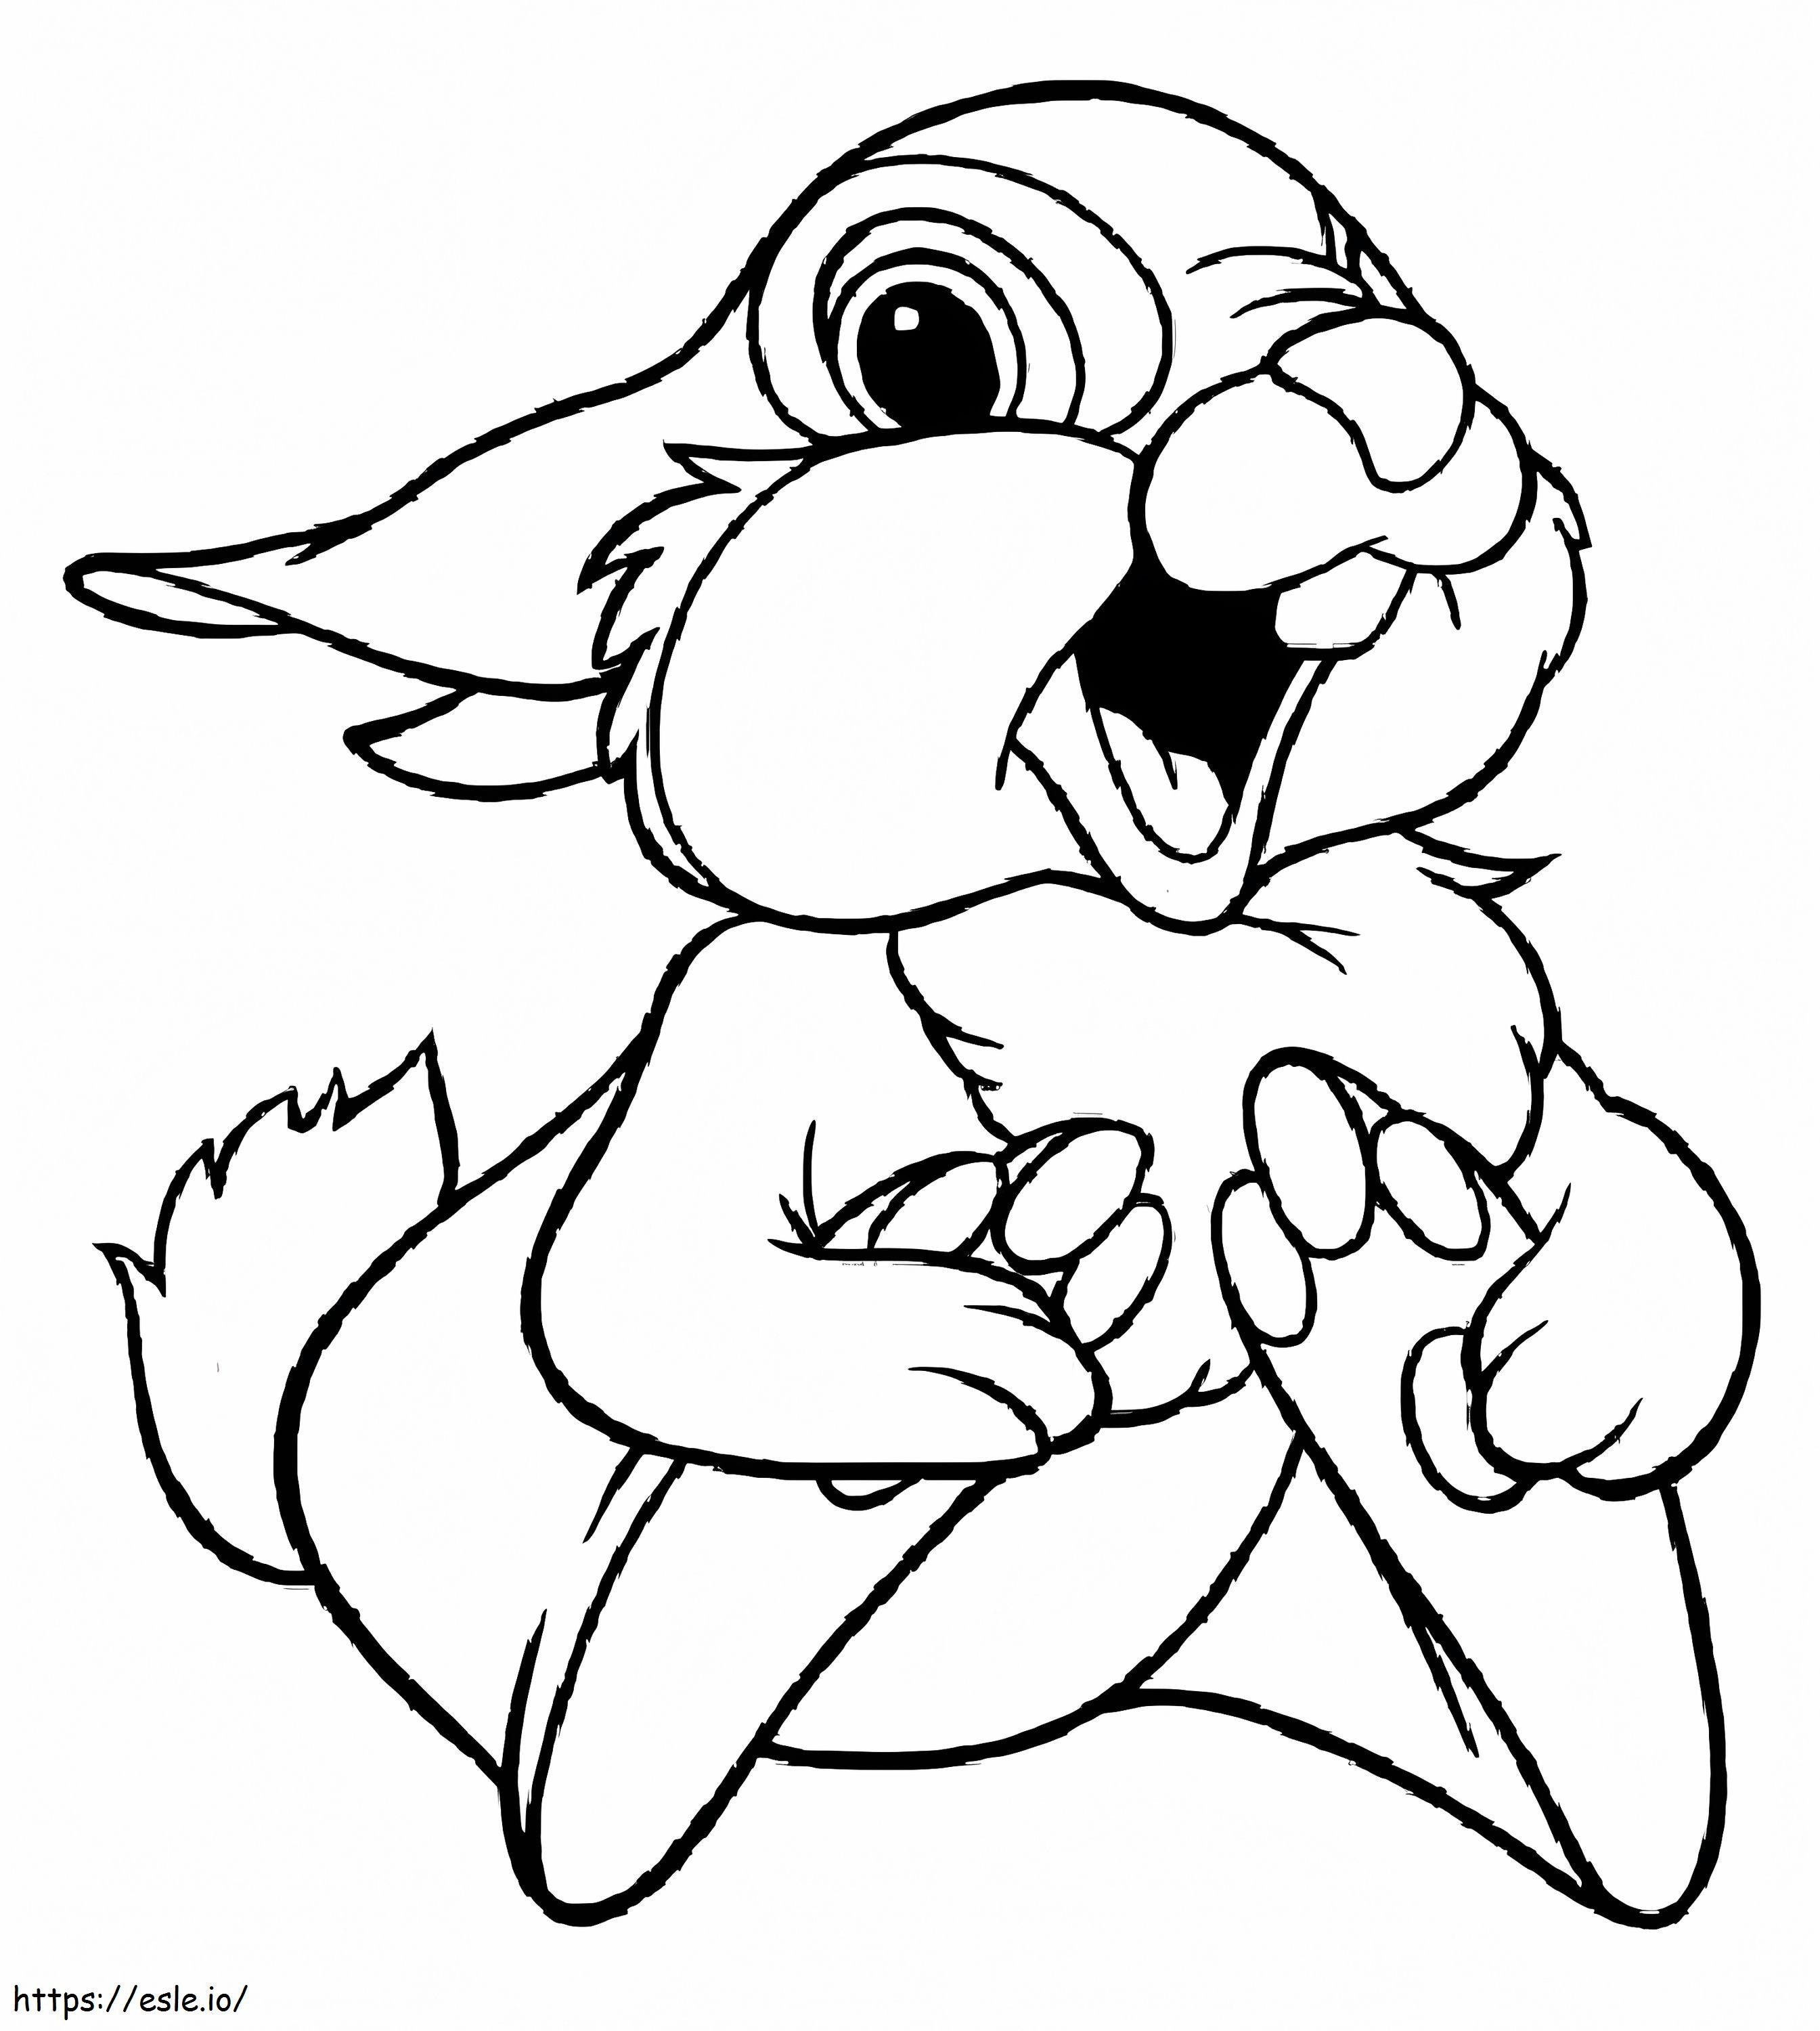 Happy Thumper coloring page